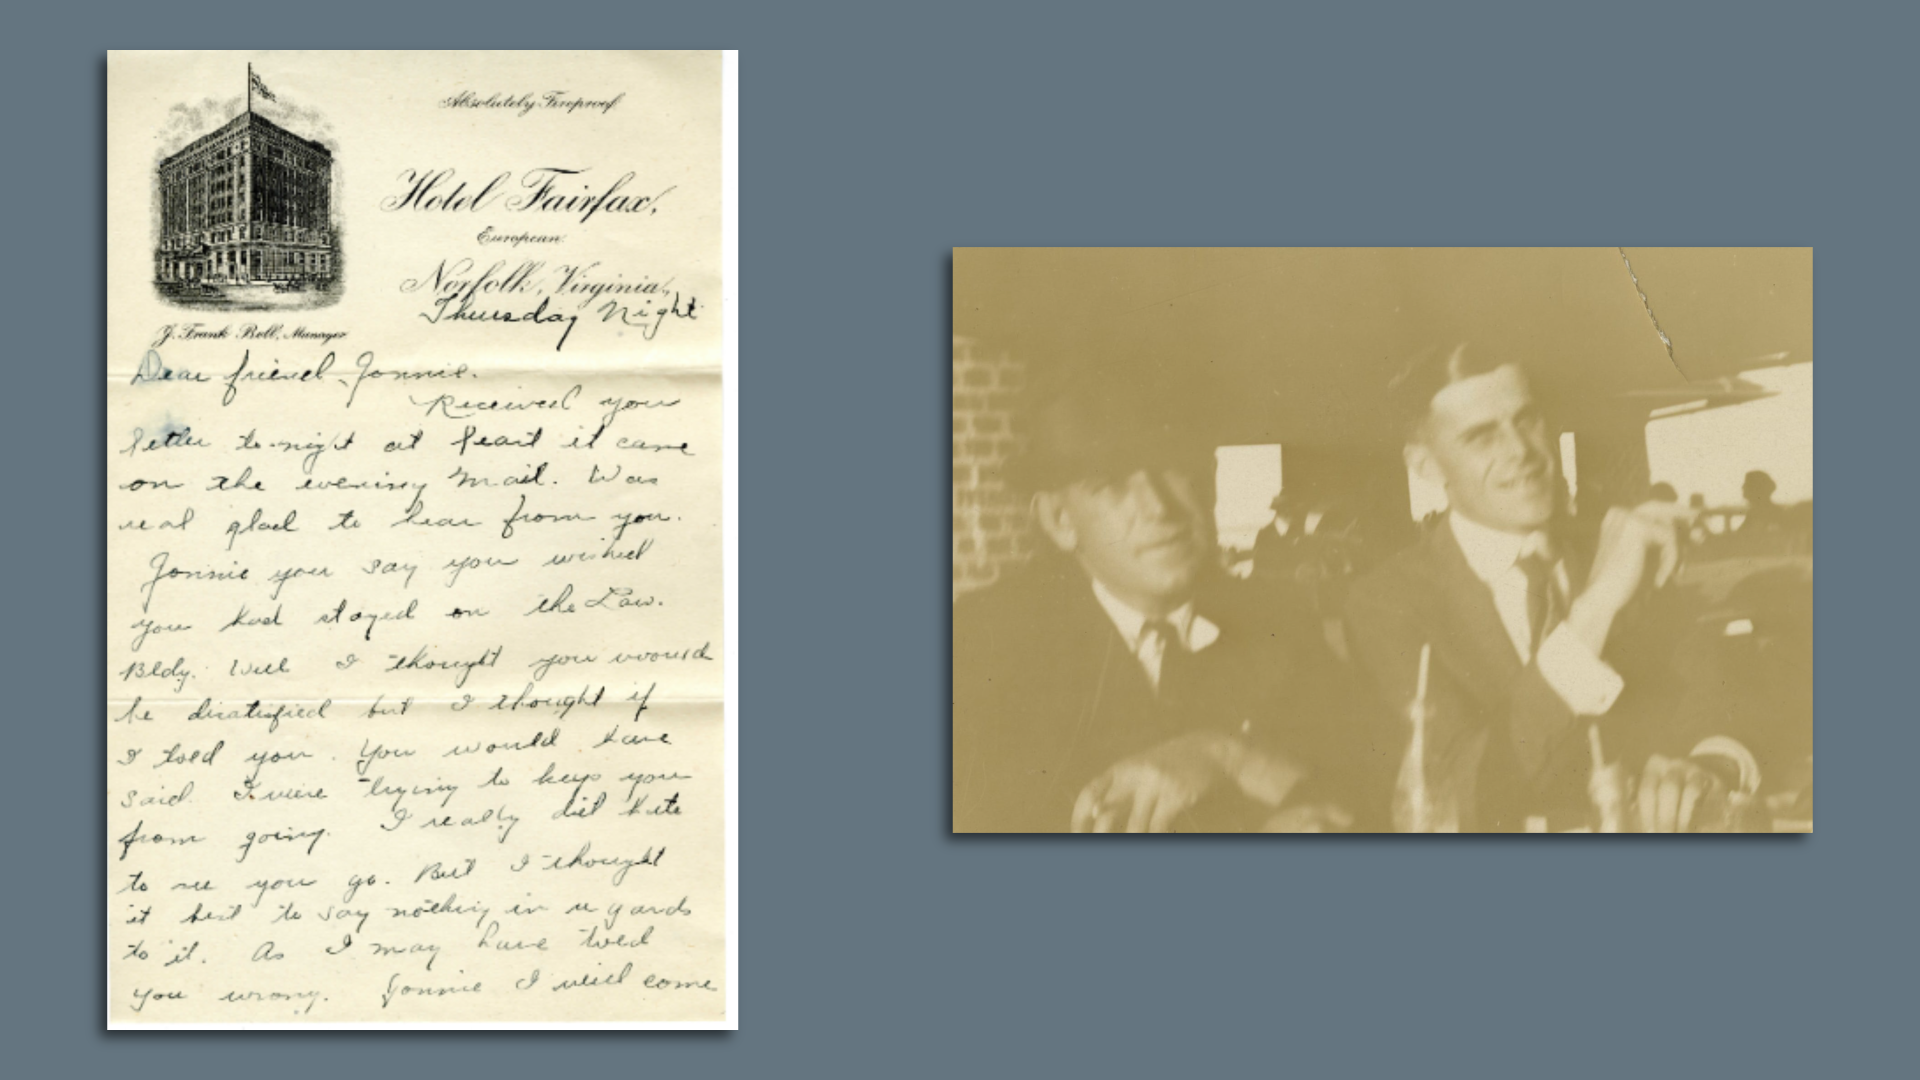 An image of a handwritten letter on hotel letter head next to a black and white photo of unidentified men in suits